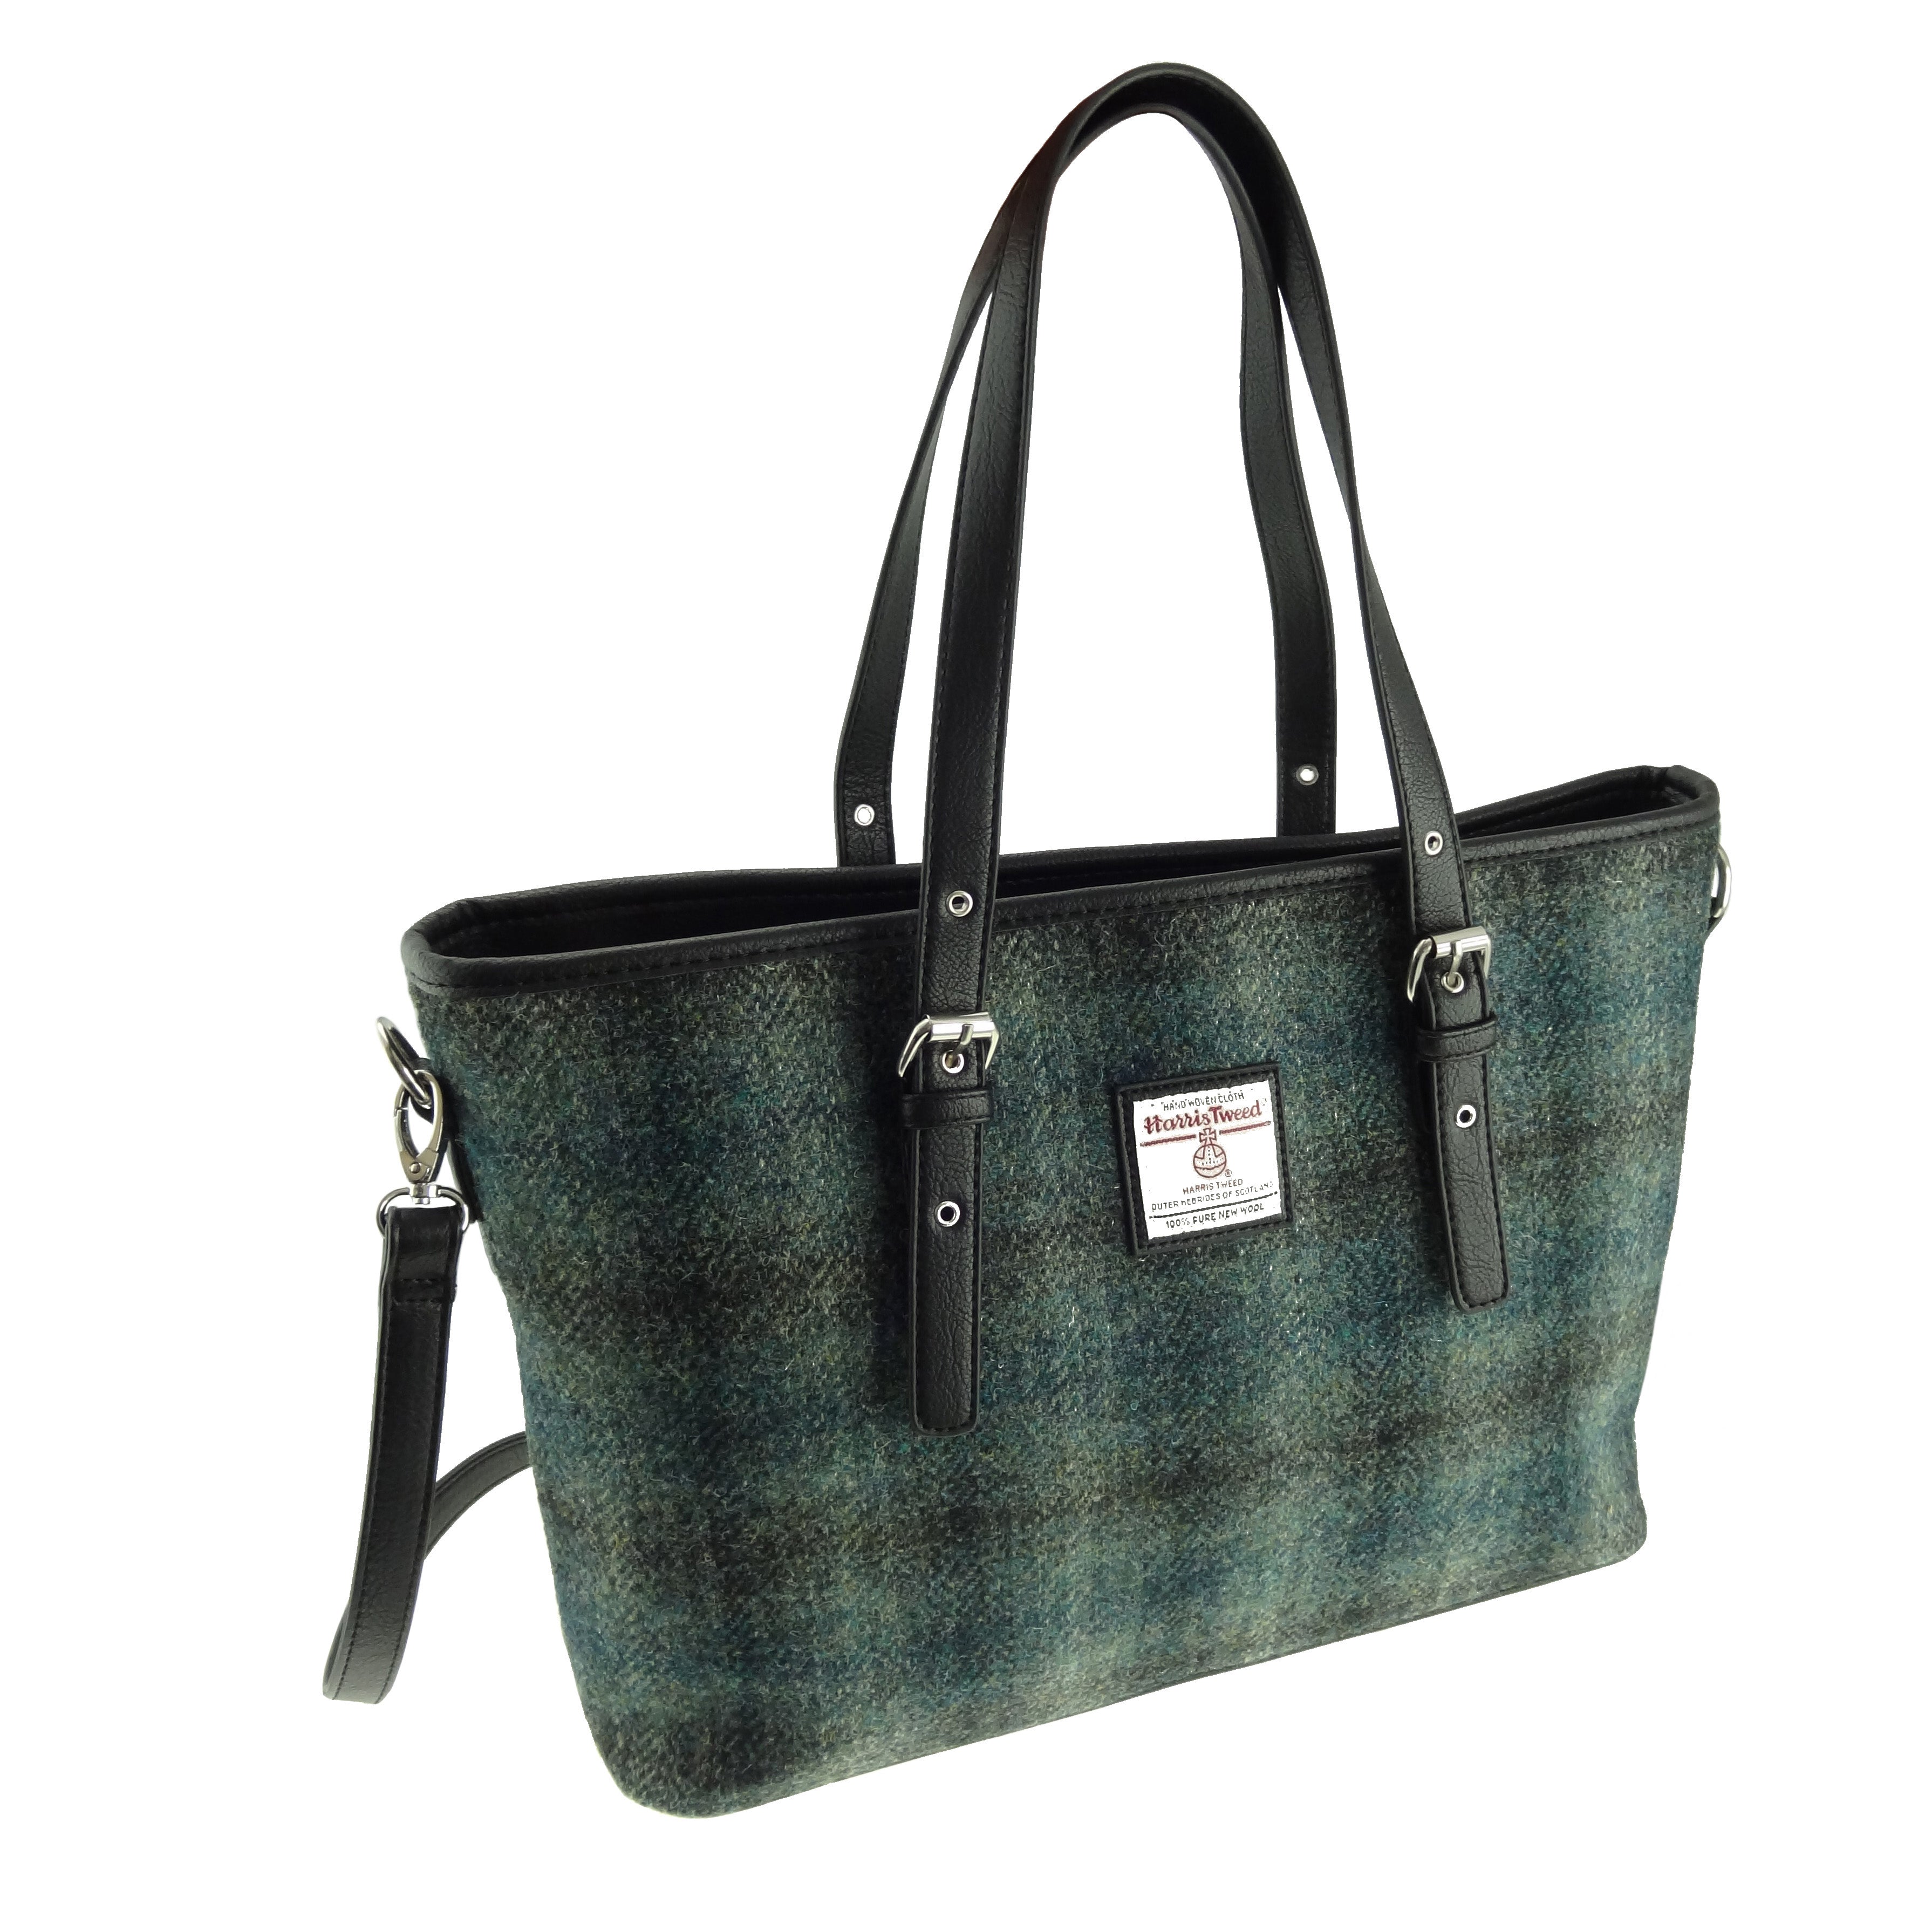 Moss Green Scottish Harris Tweed Women's Large Tote Bag with Shoulder Strap Glen Appin of Scotland